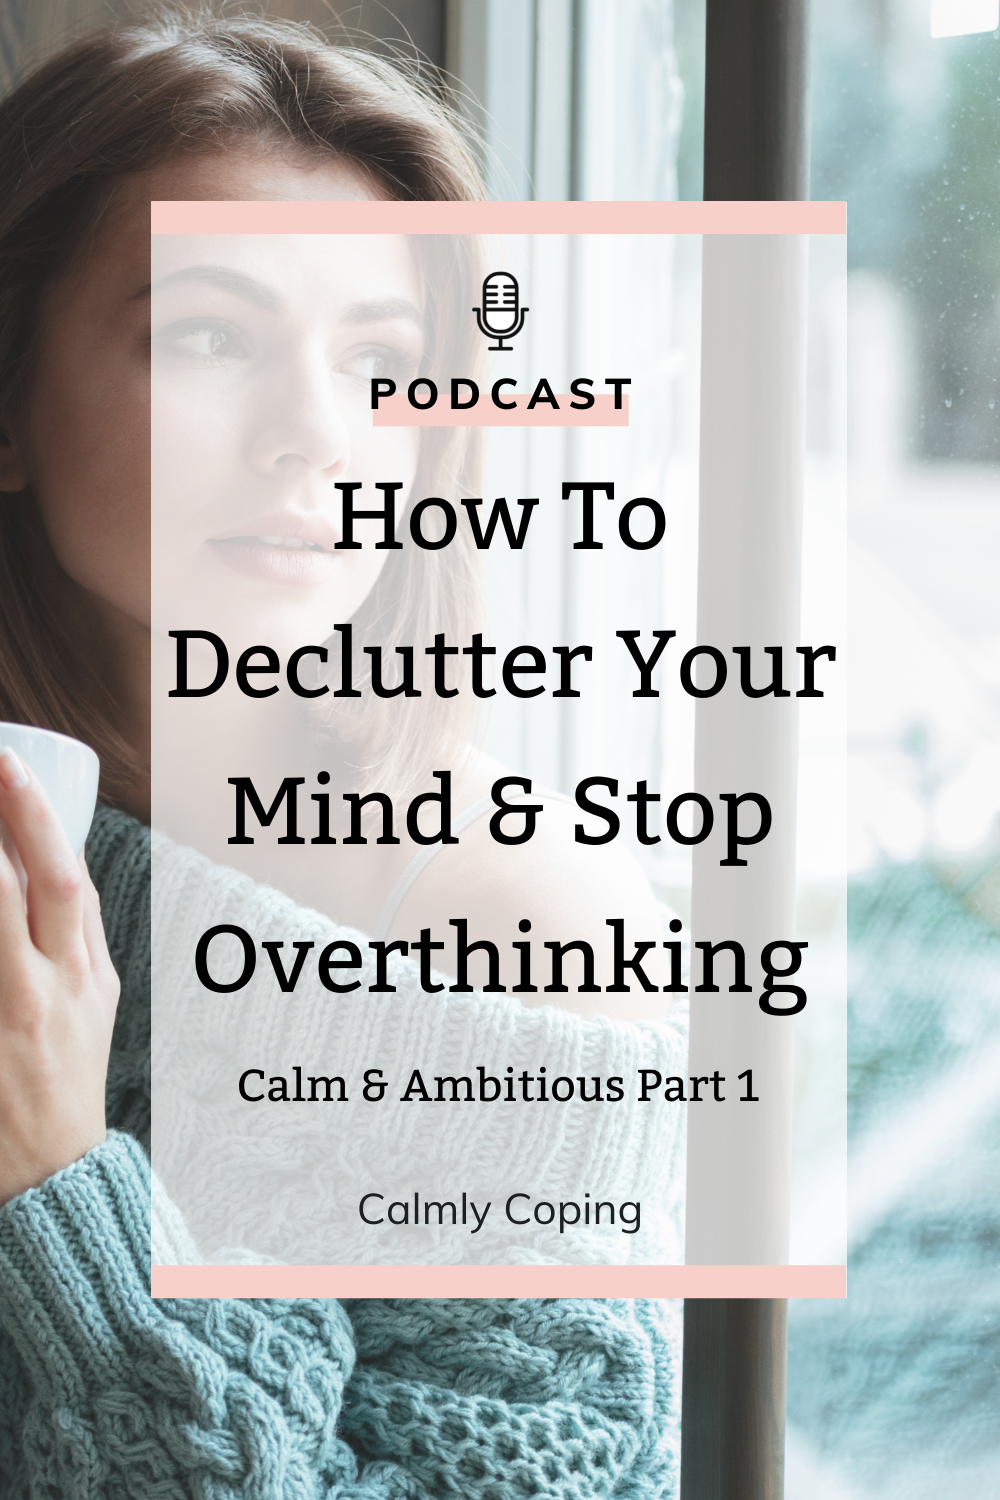 How To Declutter Your Mind & Stop Overthinking: Calm & Ambitious Part 1